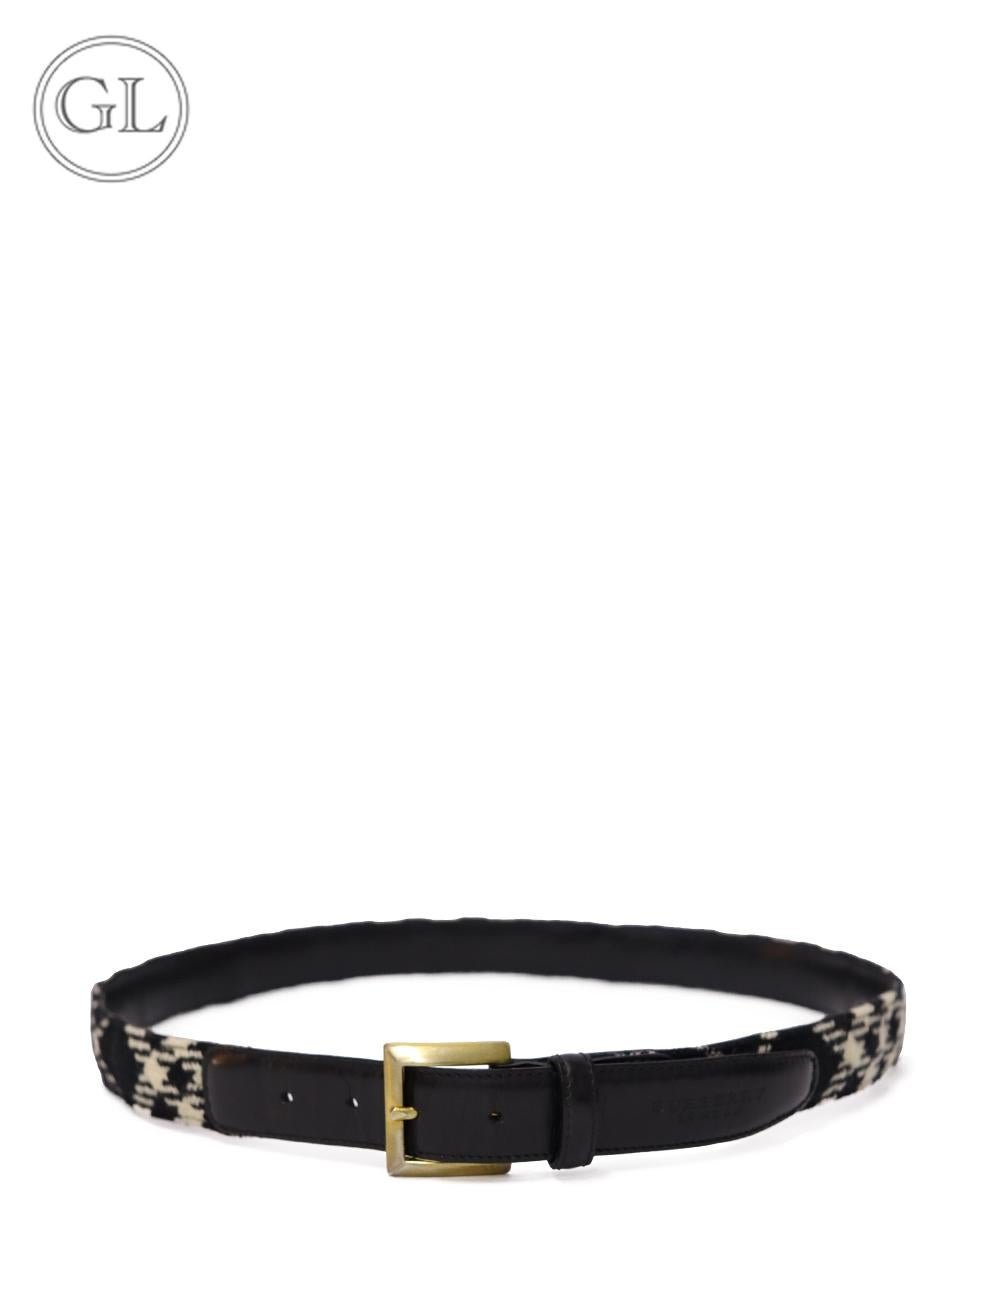 Burberry Black and White Check Belt 1